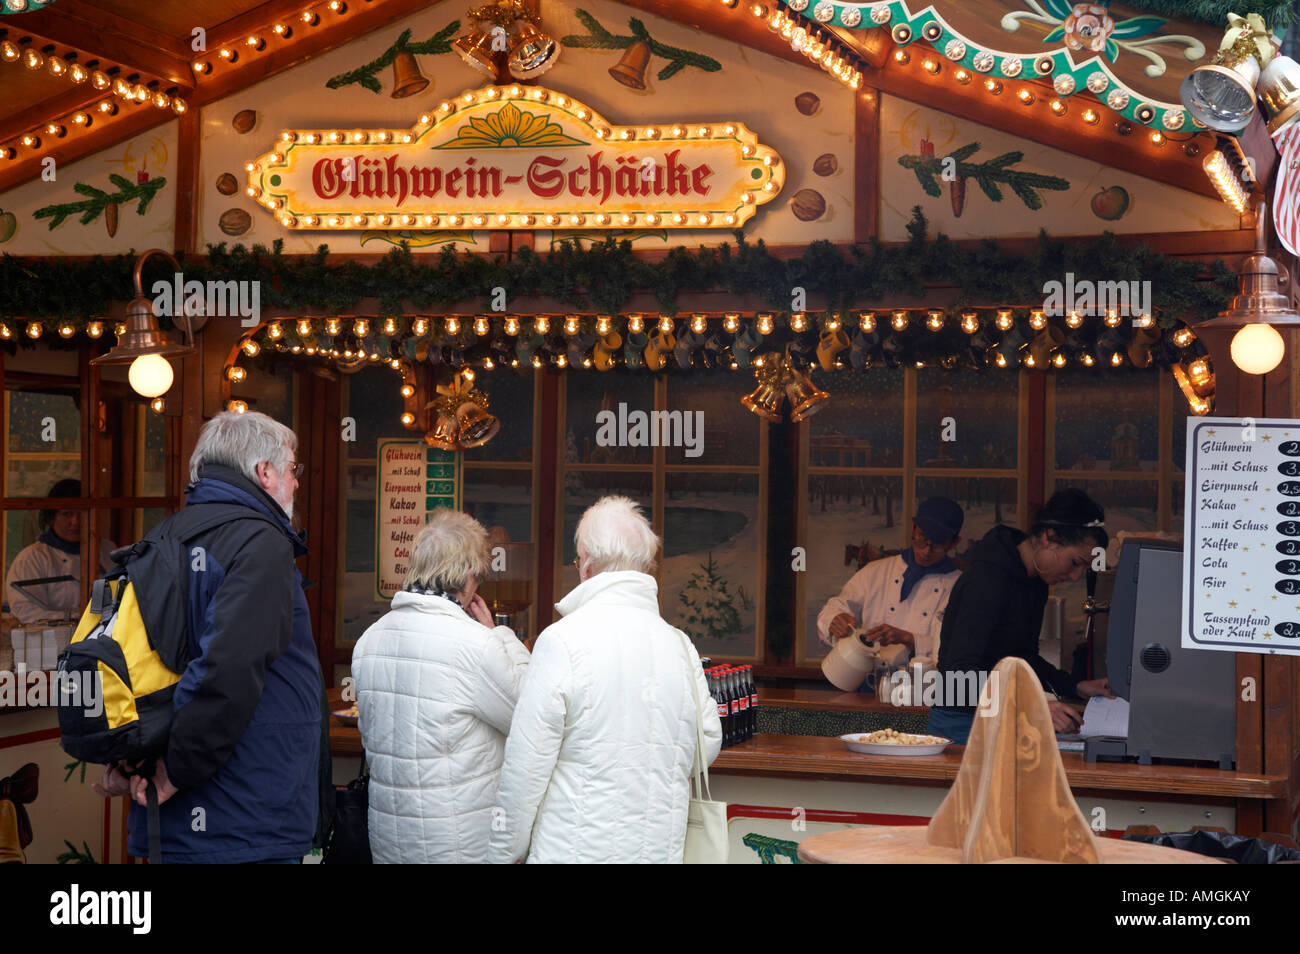 people queuing at a gluhwein stall selling mulled wine Berlin Germany Stock Photo